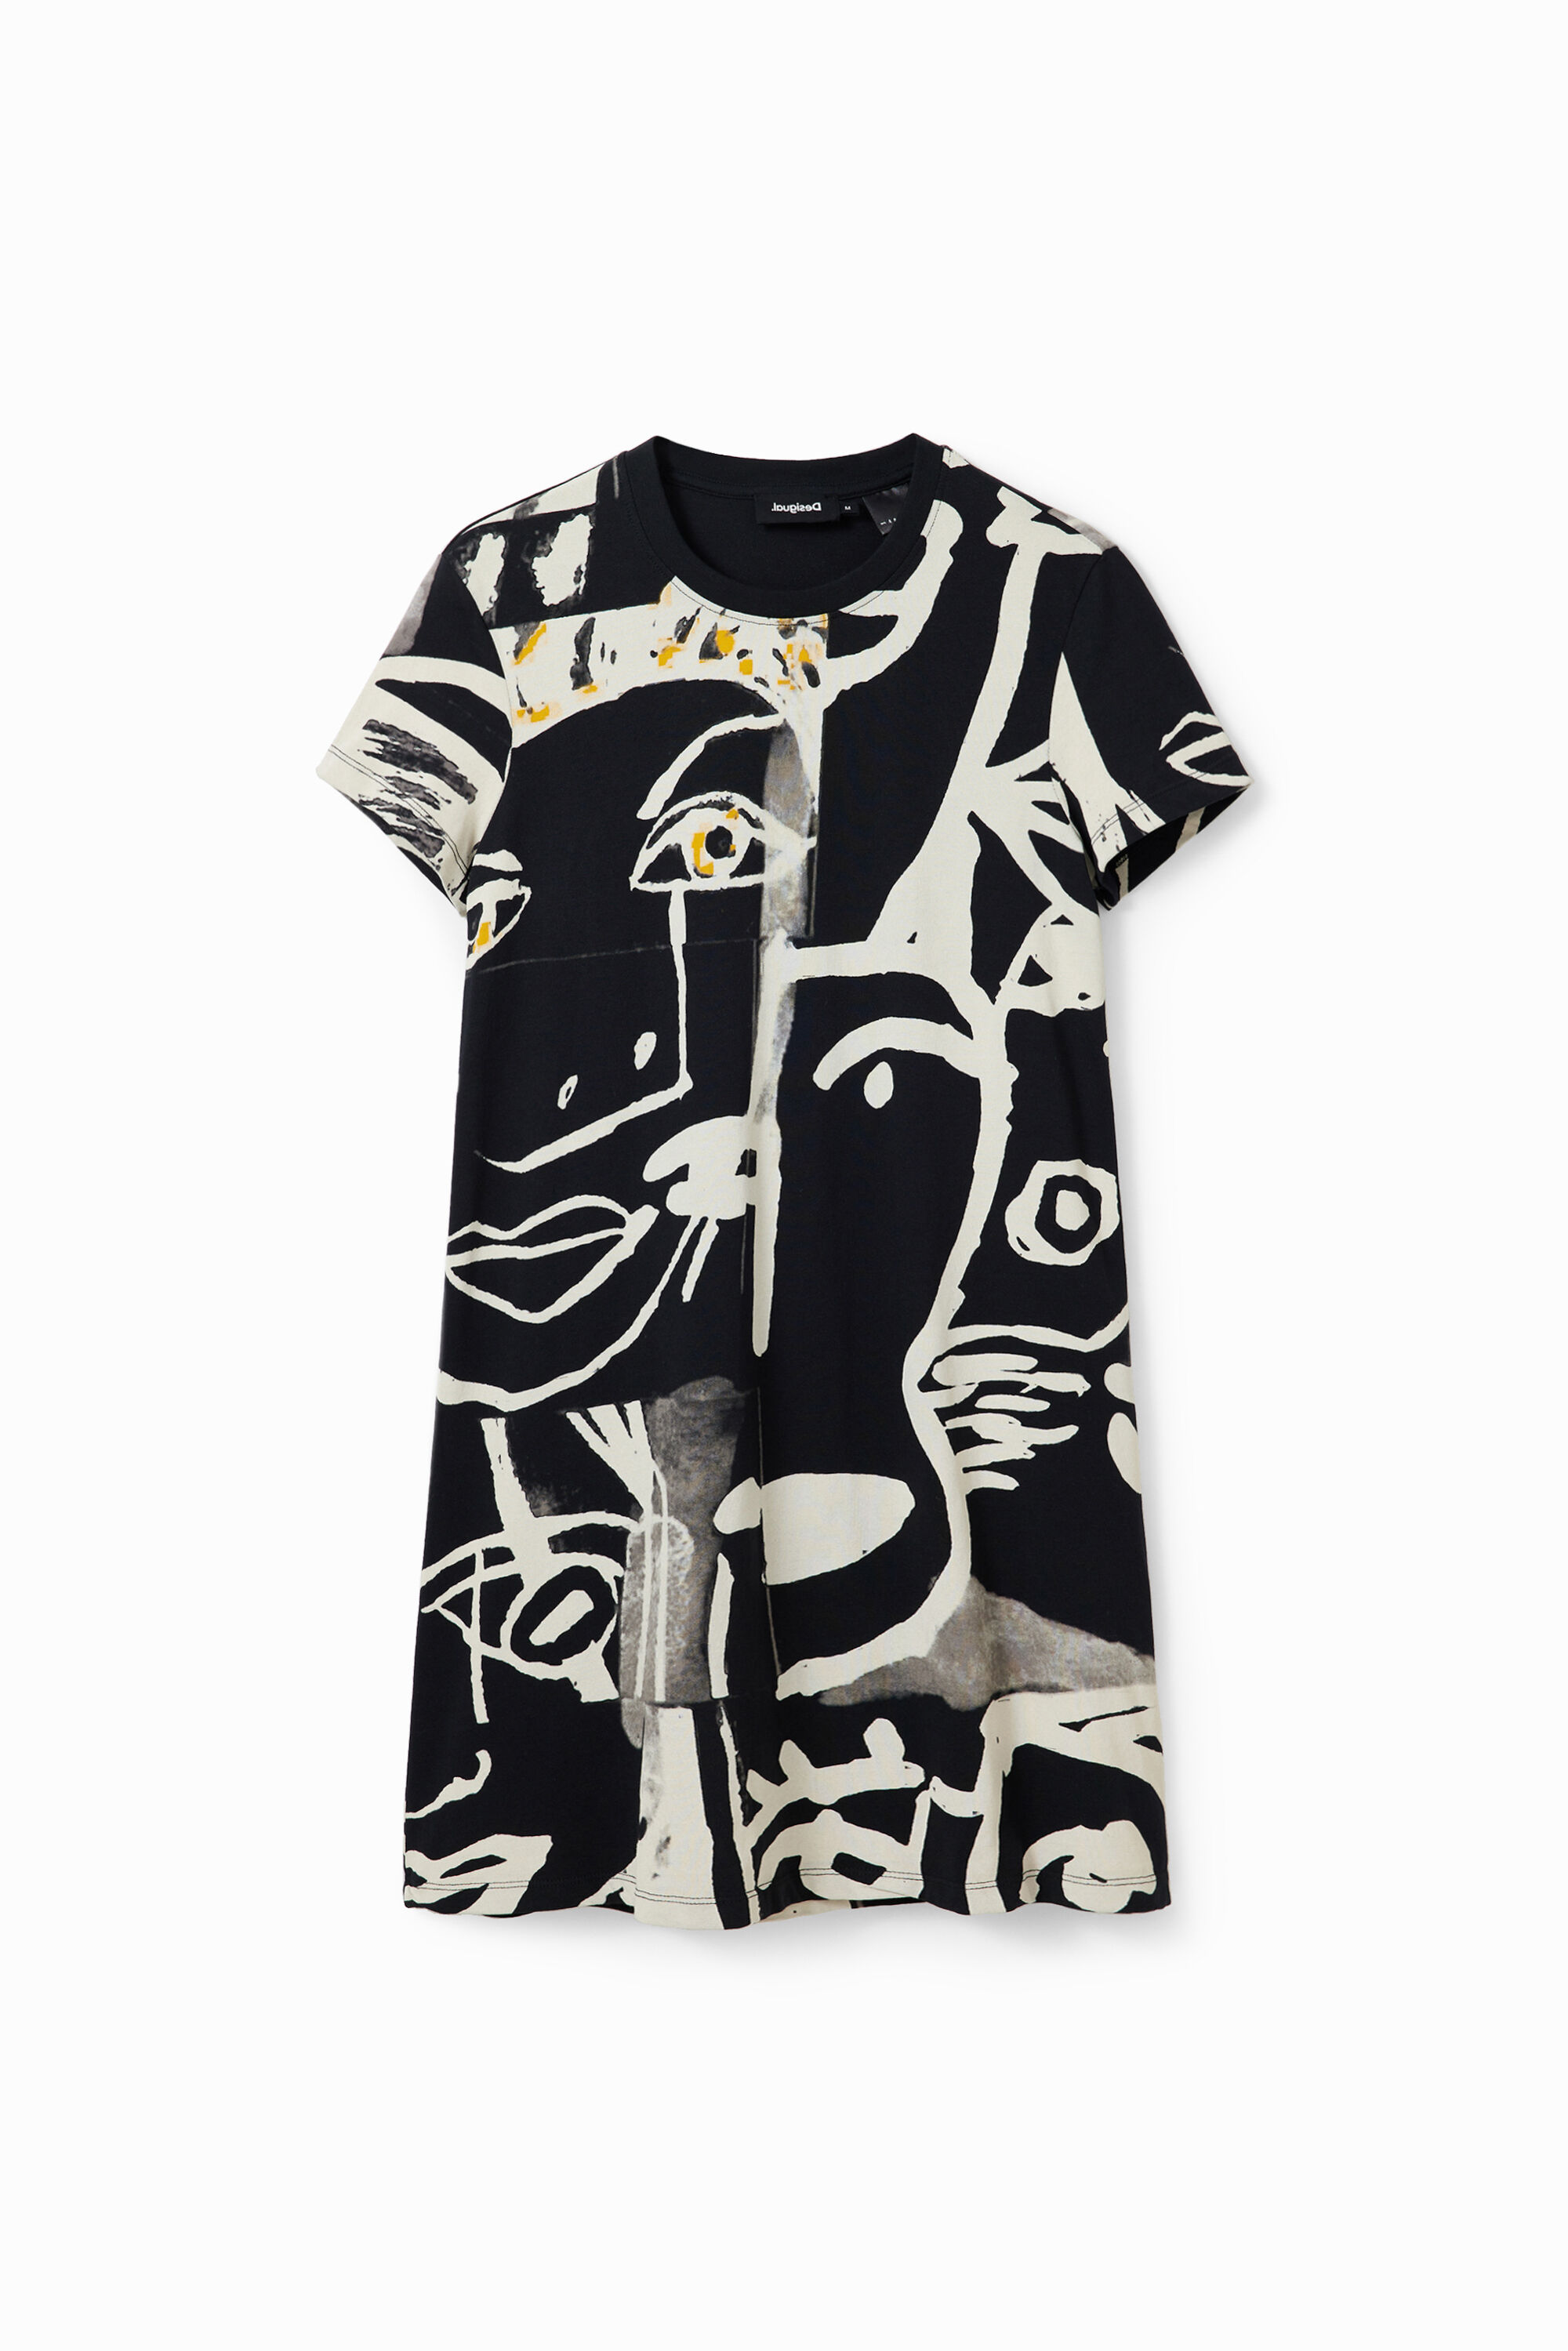 Desigual short cotton hand-painted style dress Fall 2023 collection now at Angel of Vancouver Canada